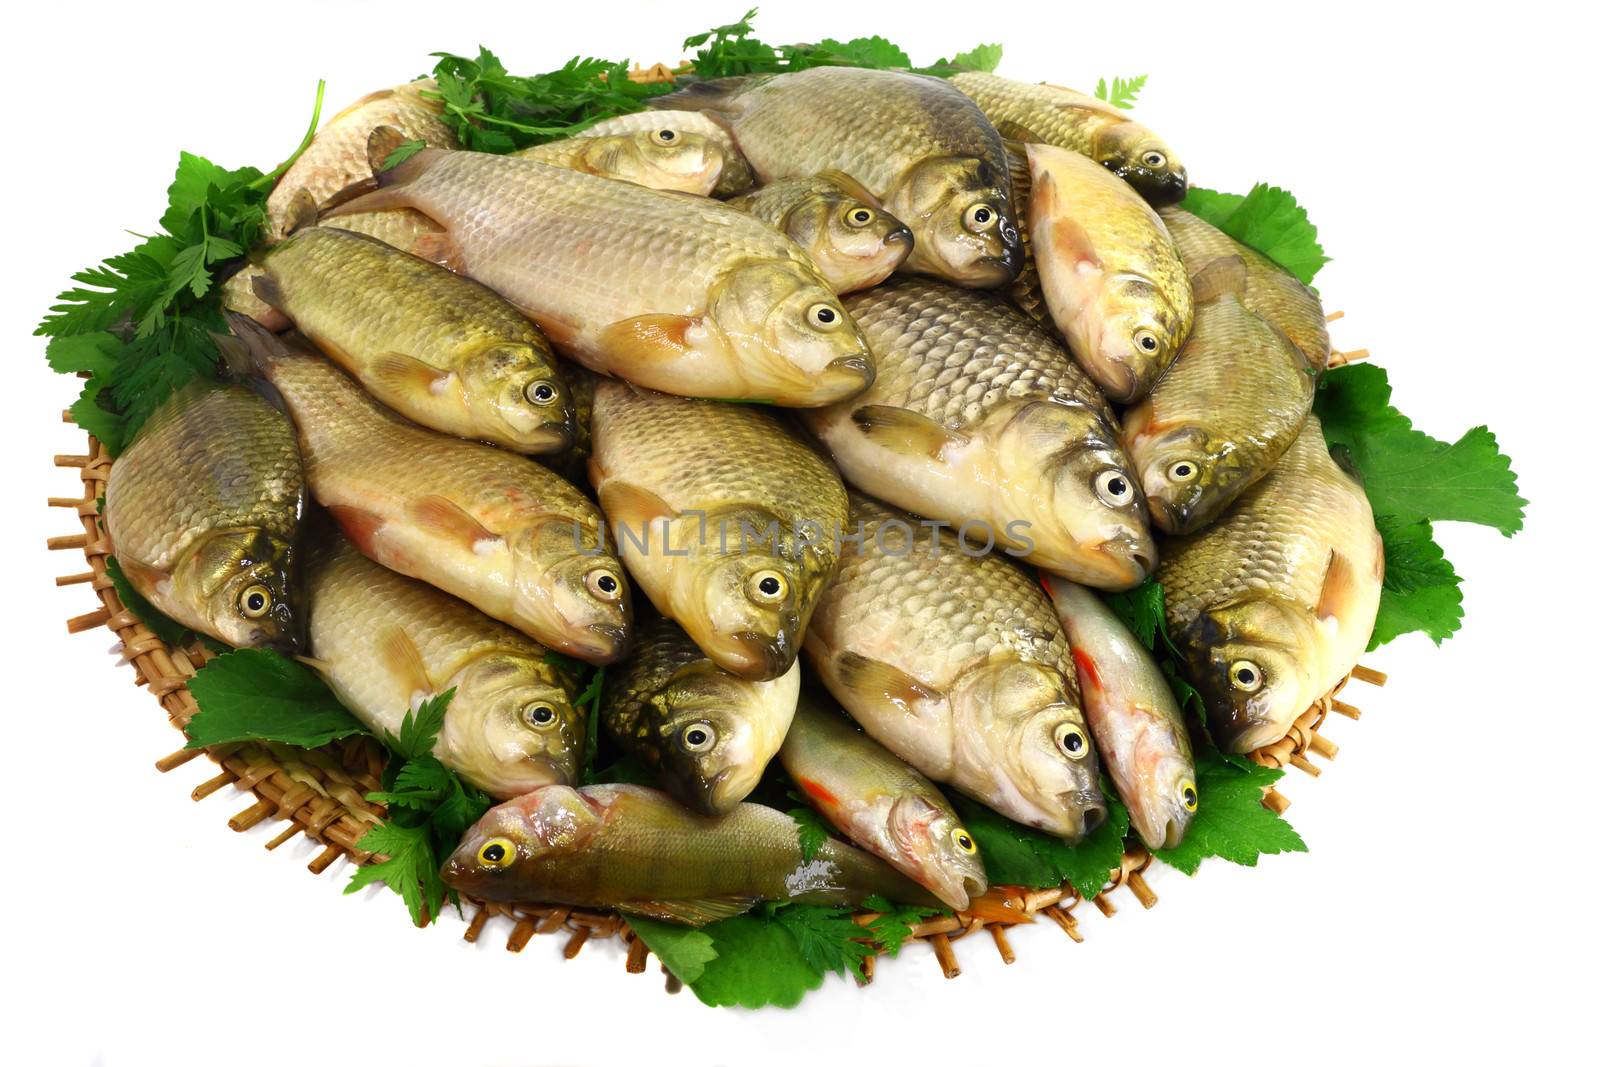 River fish (carp) and the greens on a round dish. by georgina198